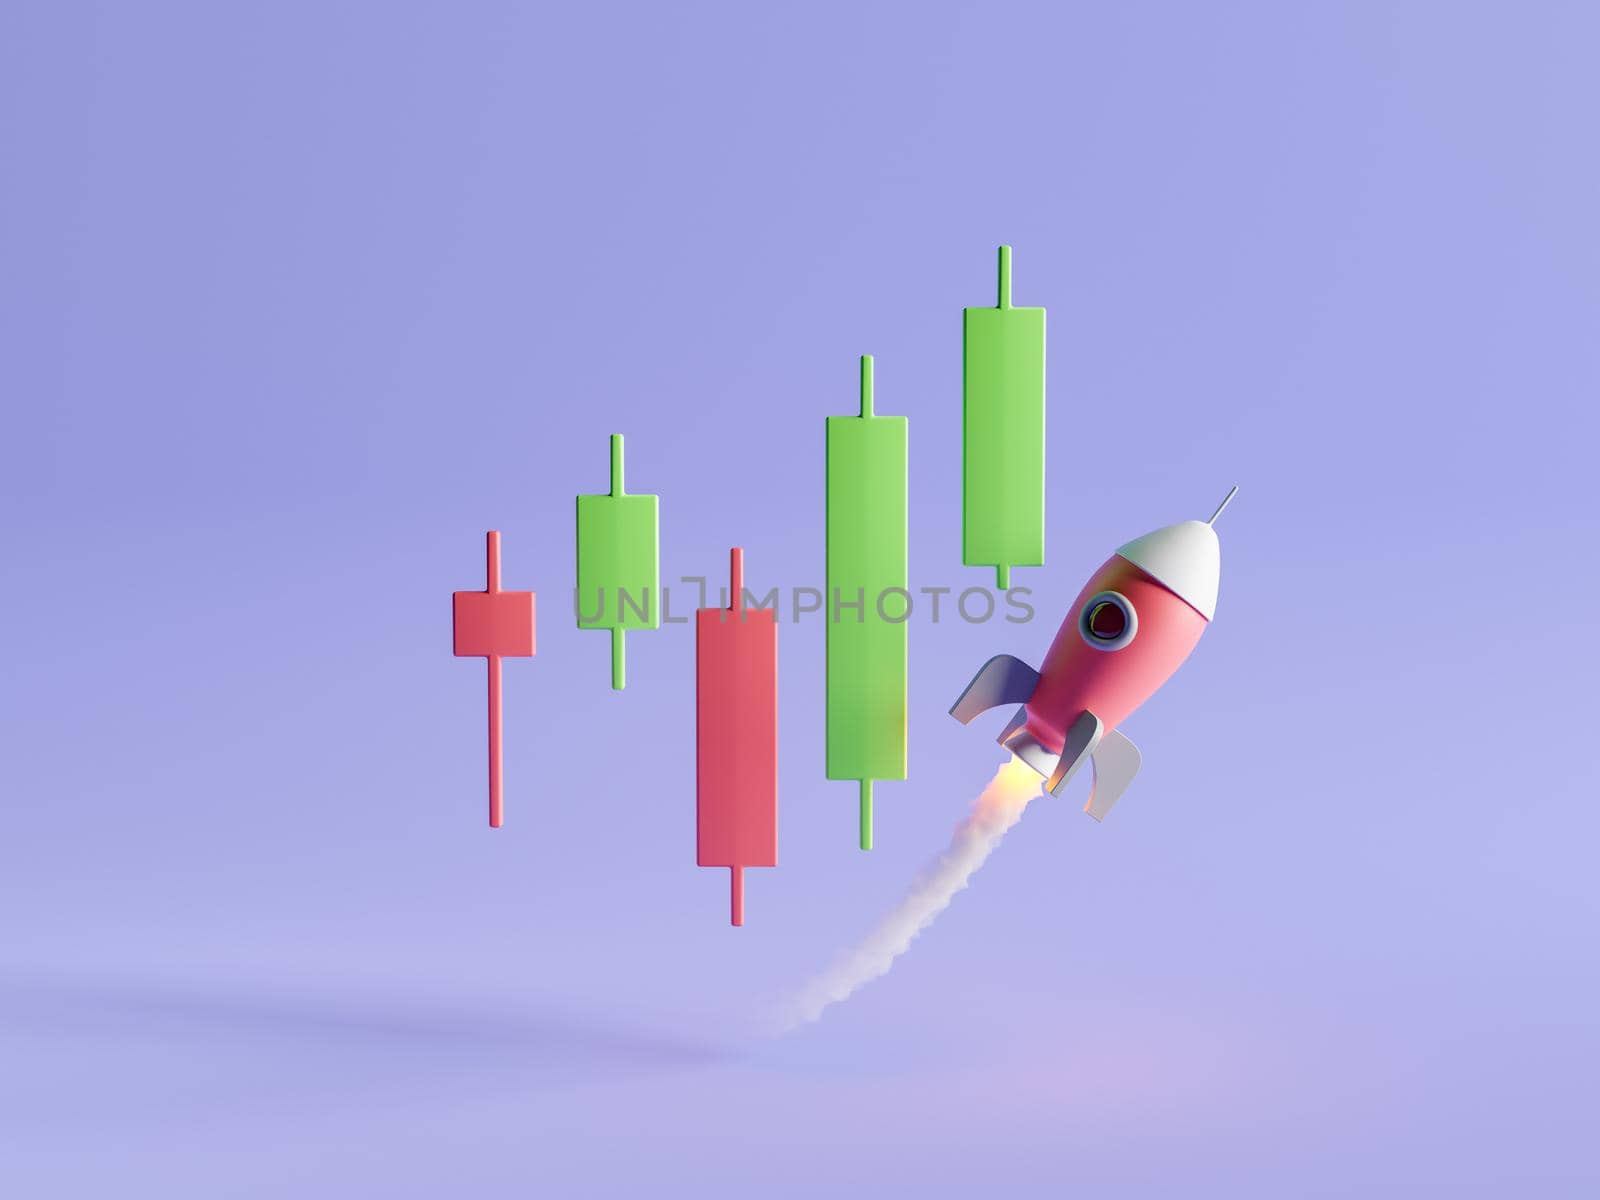 rising chart candles with a rocket below taking off. 3d rendering